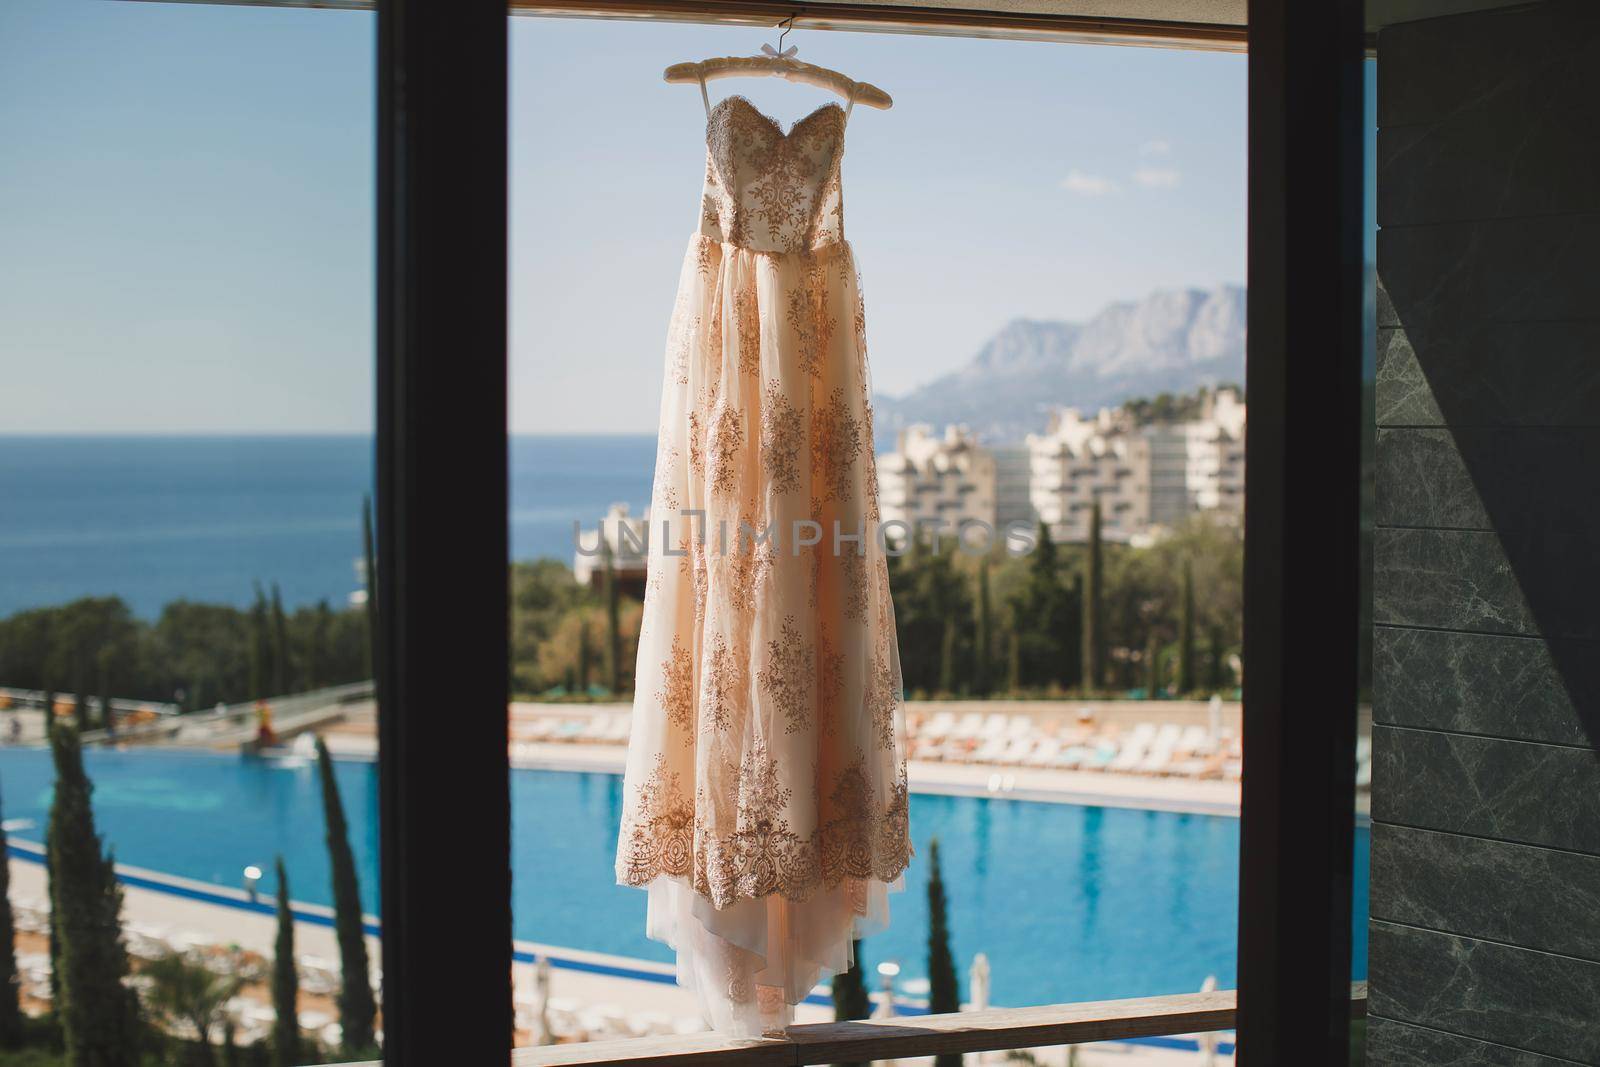 Wedding dress at the hotel on the background of the pool, ocean and mountains.